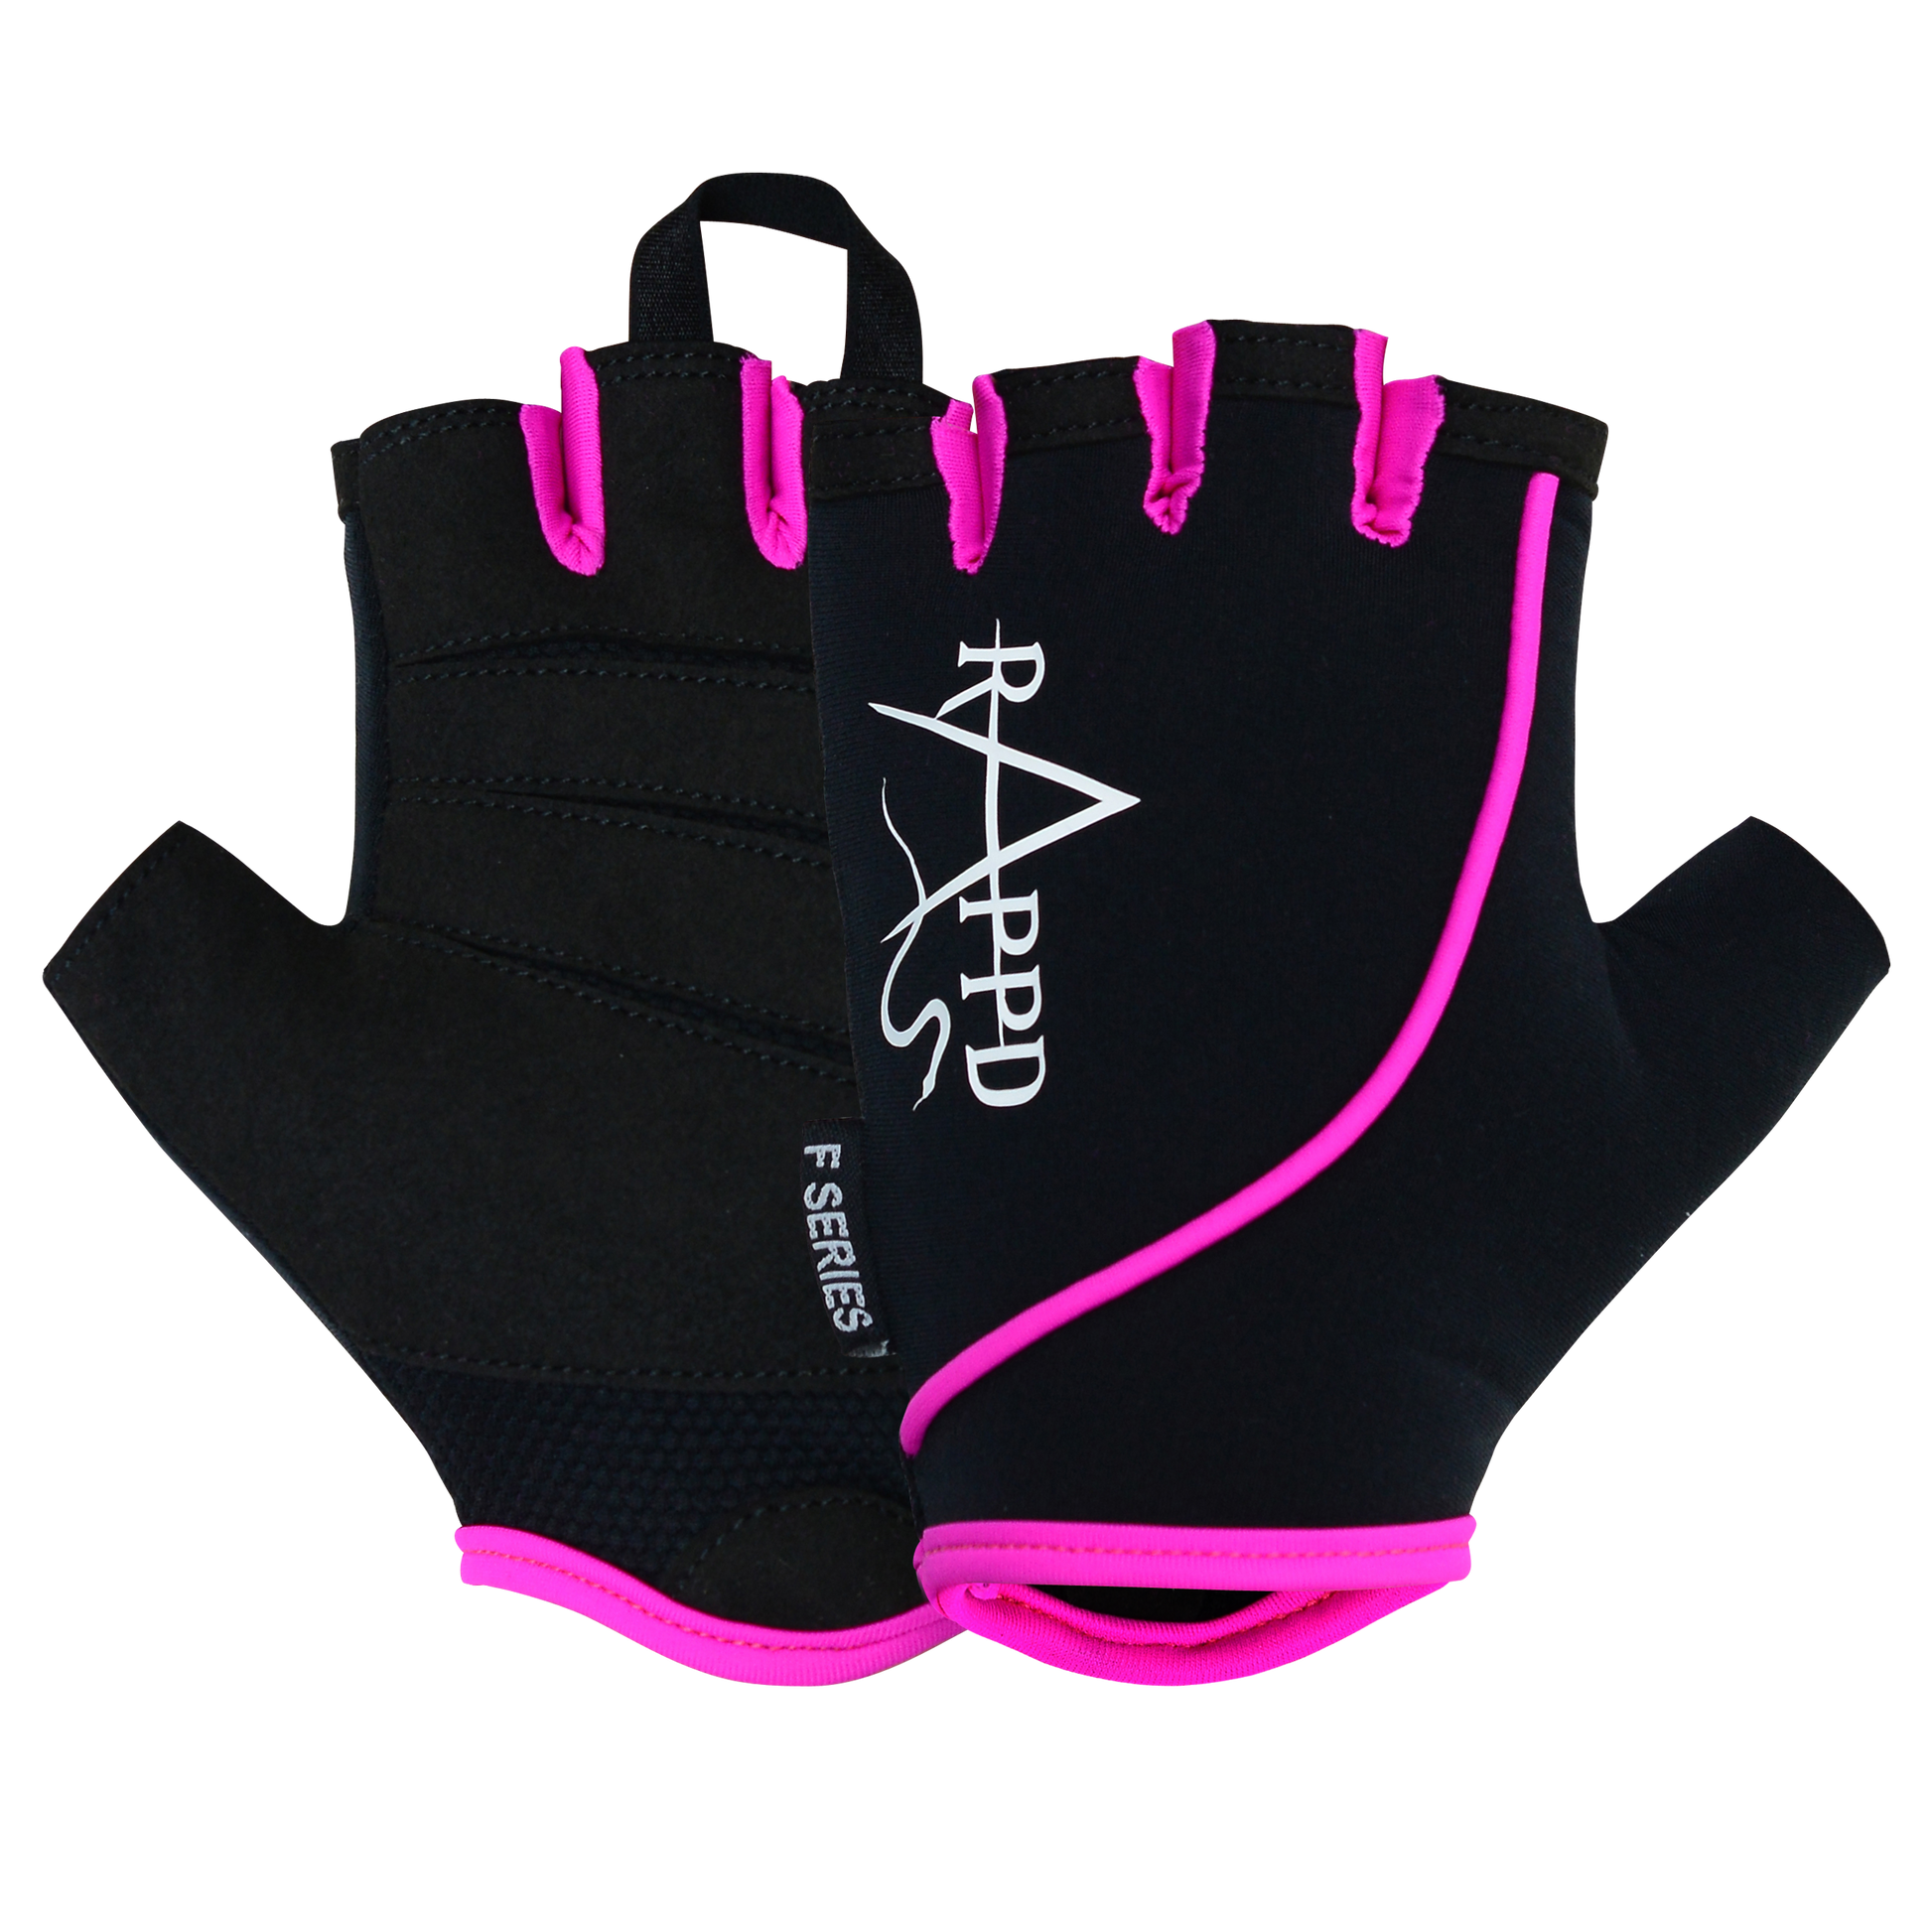 Rappd F Series Gloves